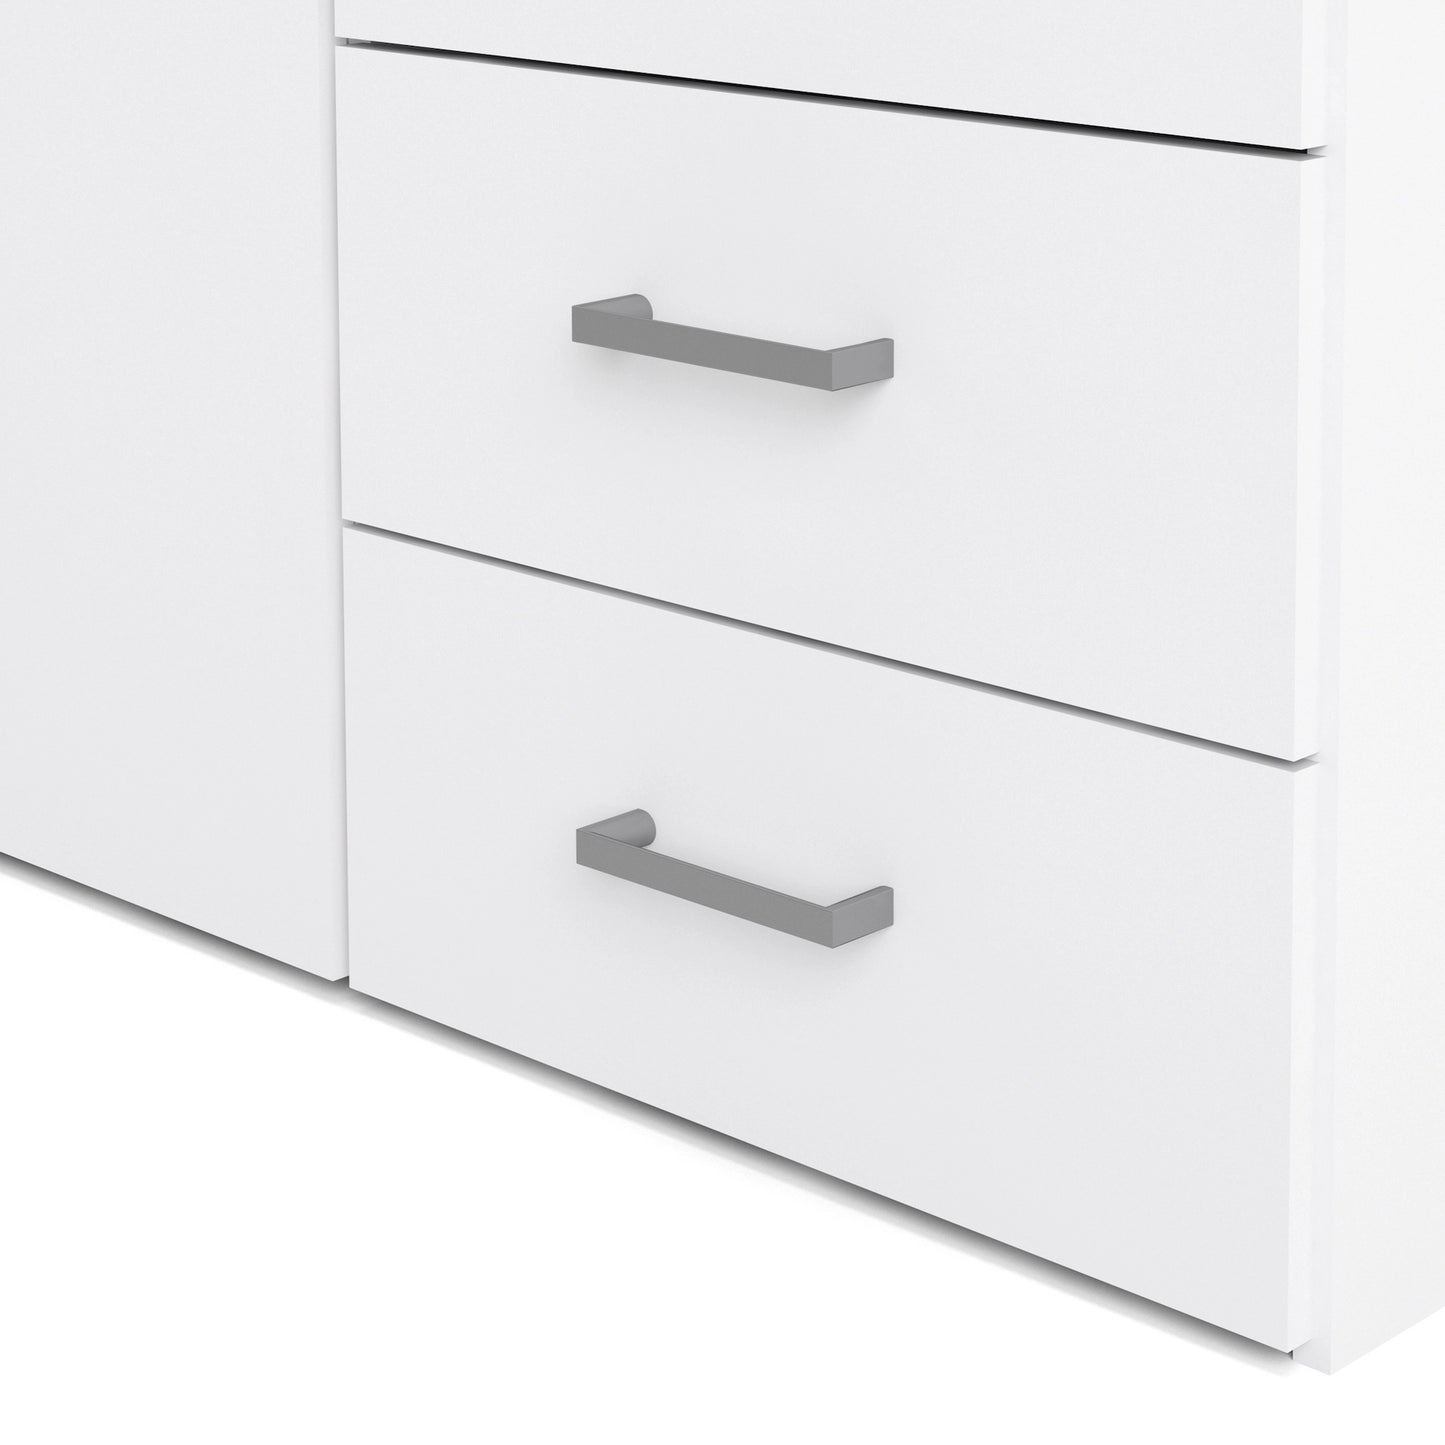 Furniture To Go Space Wardrobe with 2 Doors + 3 Drawers White 1750